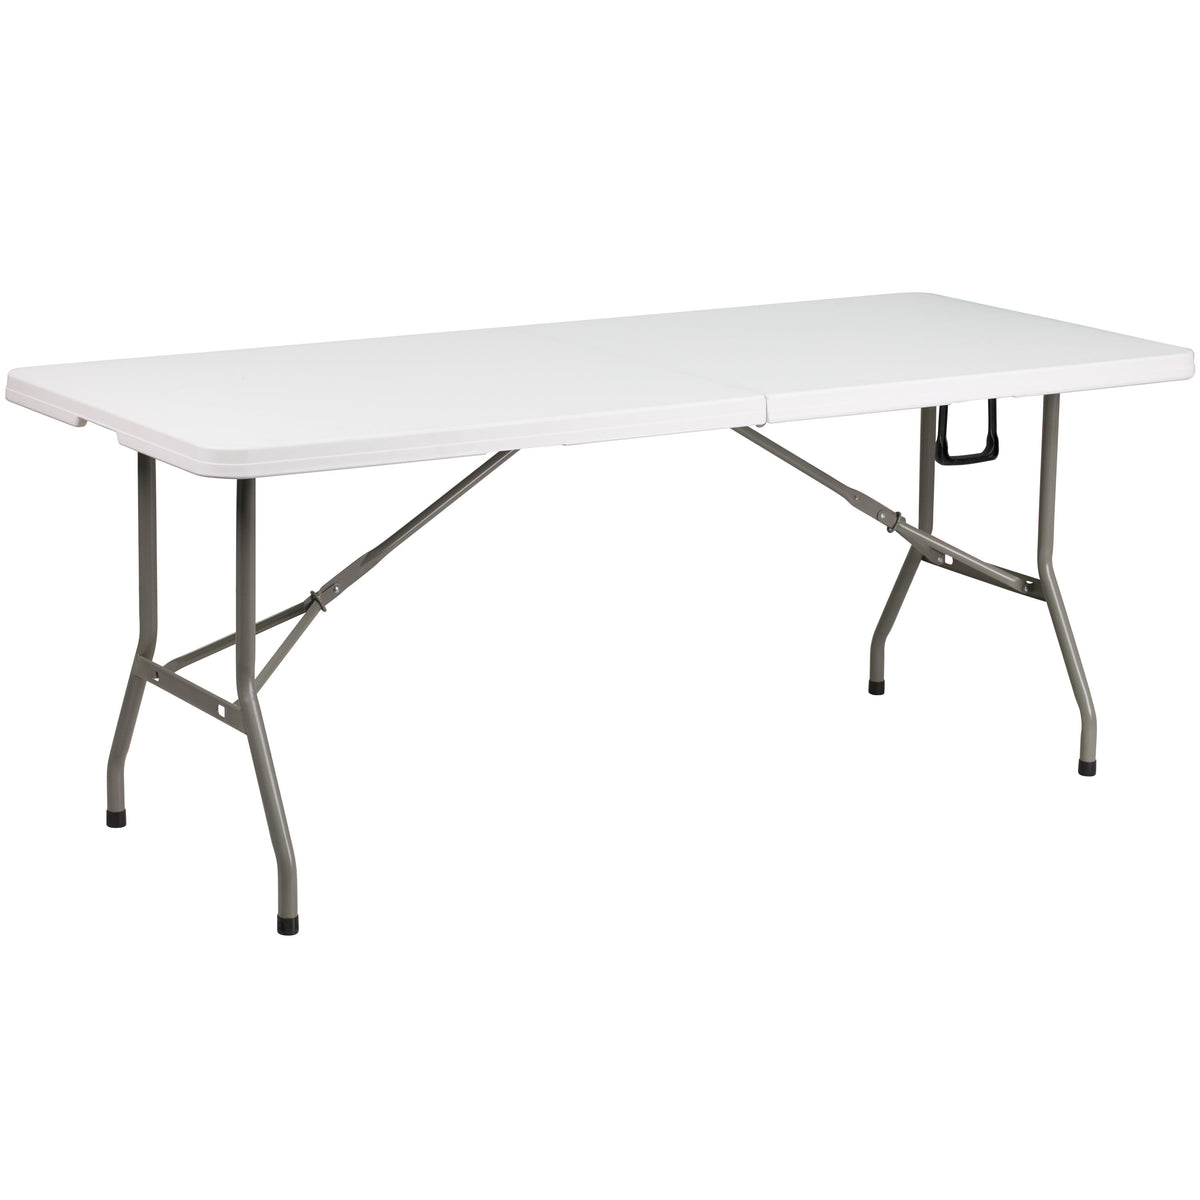 White |#| 8' x 8' White Pop Up Canopy Tent and 6 Ft. Bi-Fold Table with Carrying Handle